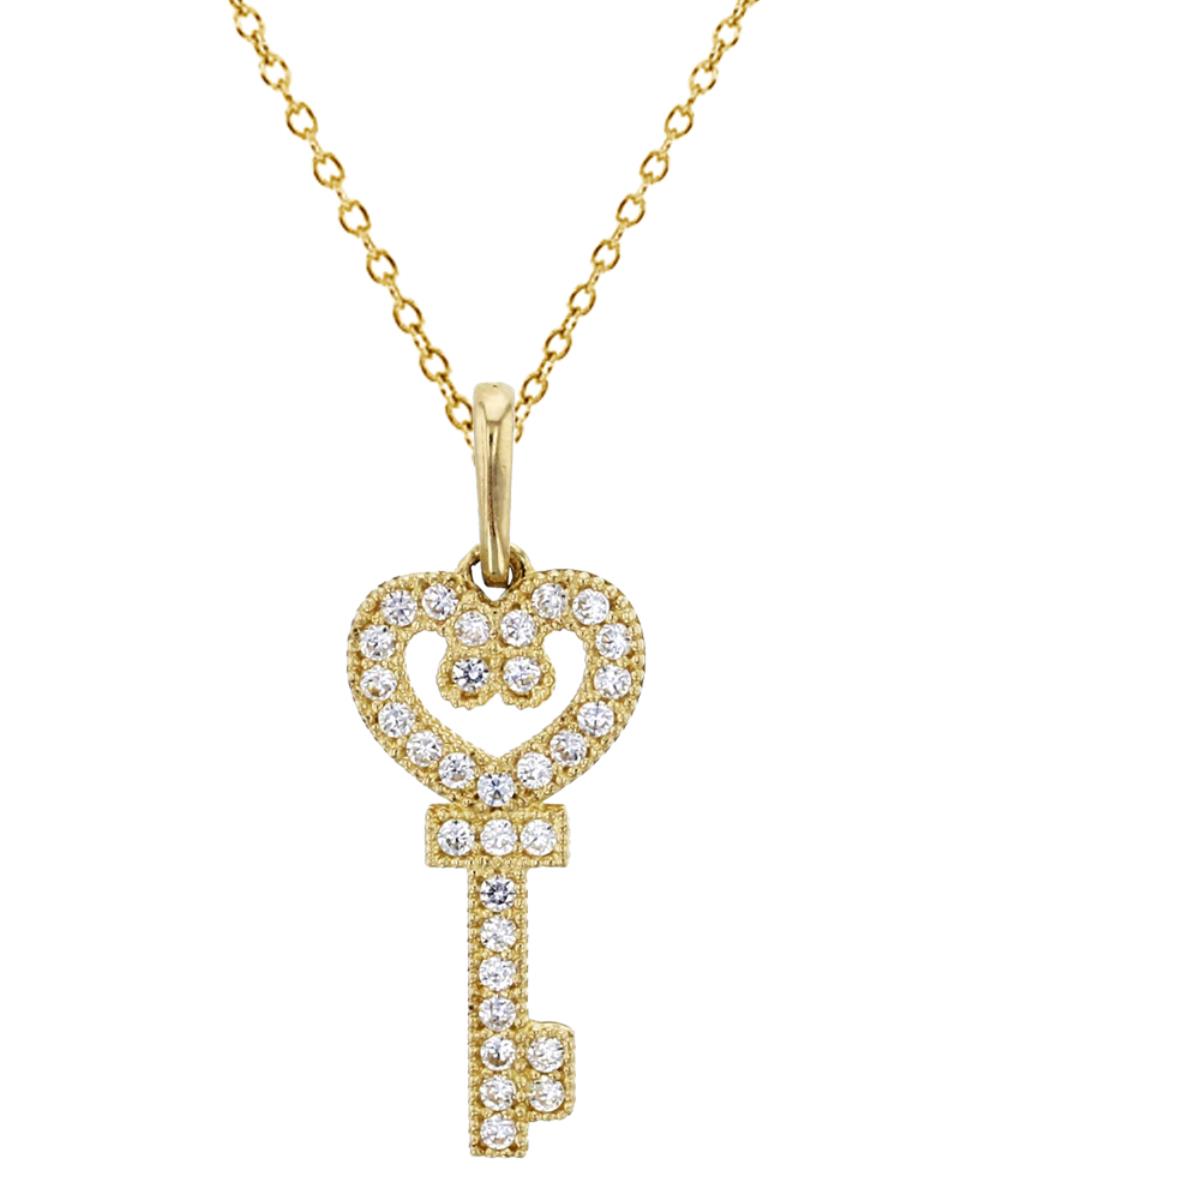 14K Yellow Gold Micropave 21x8mm Milgrain Heart Key 18" Necklace